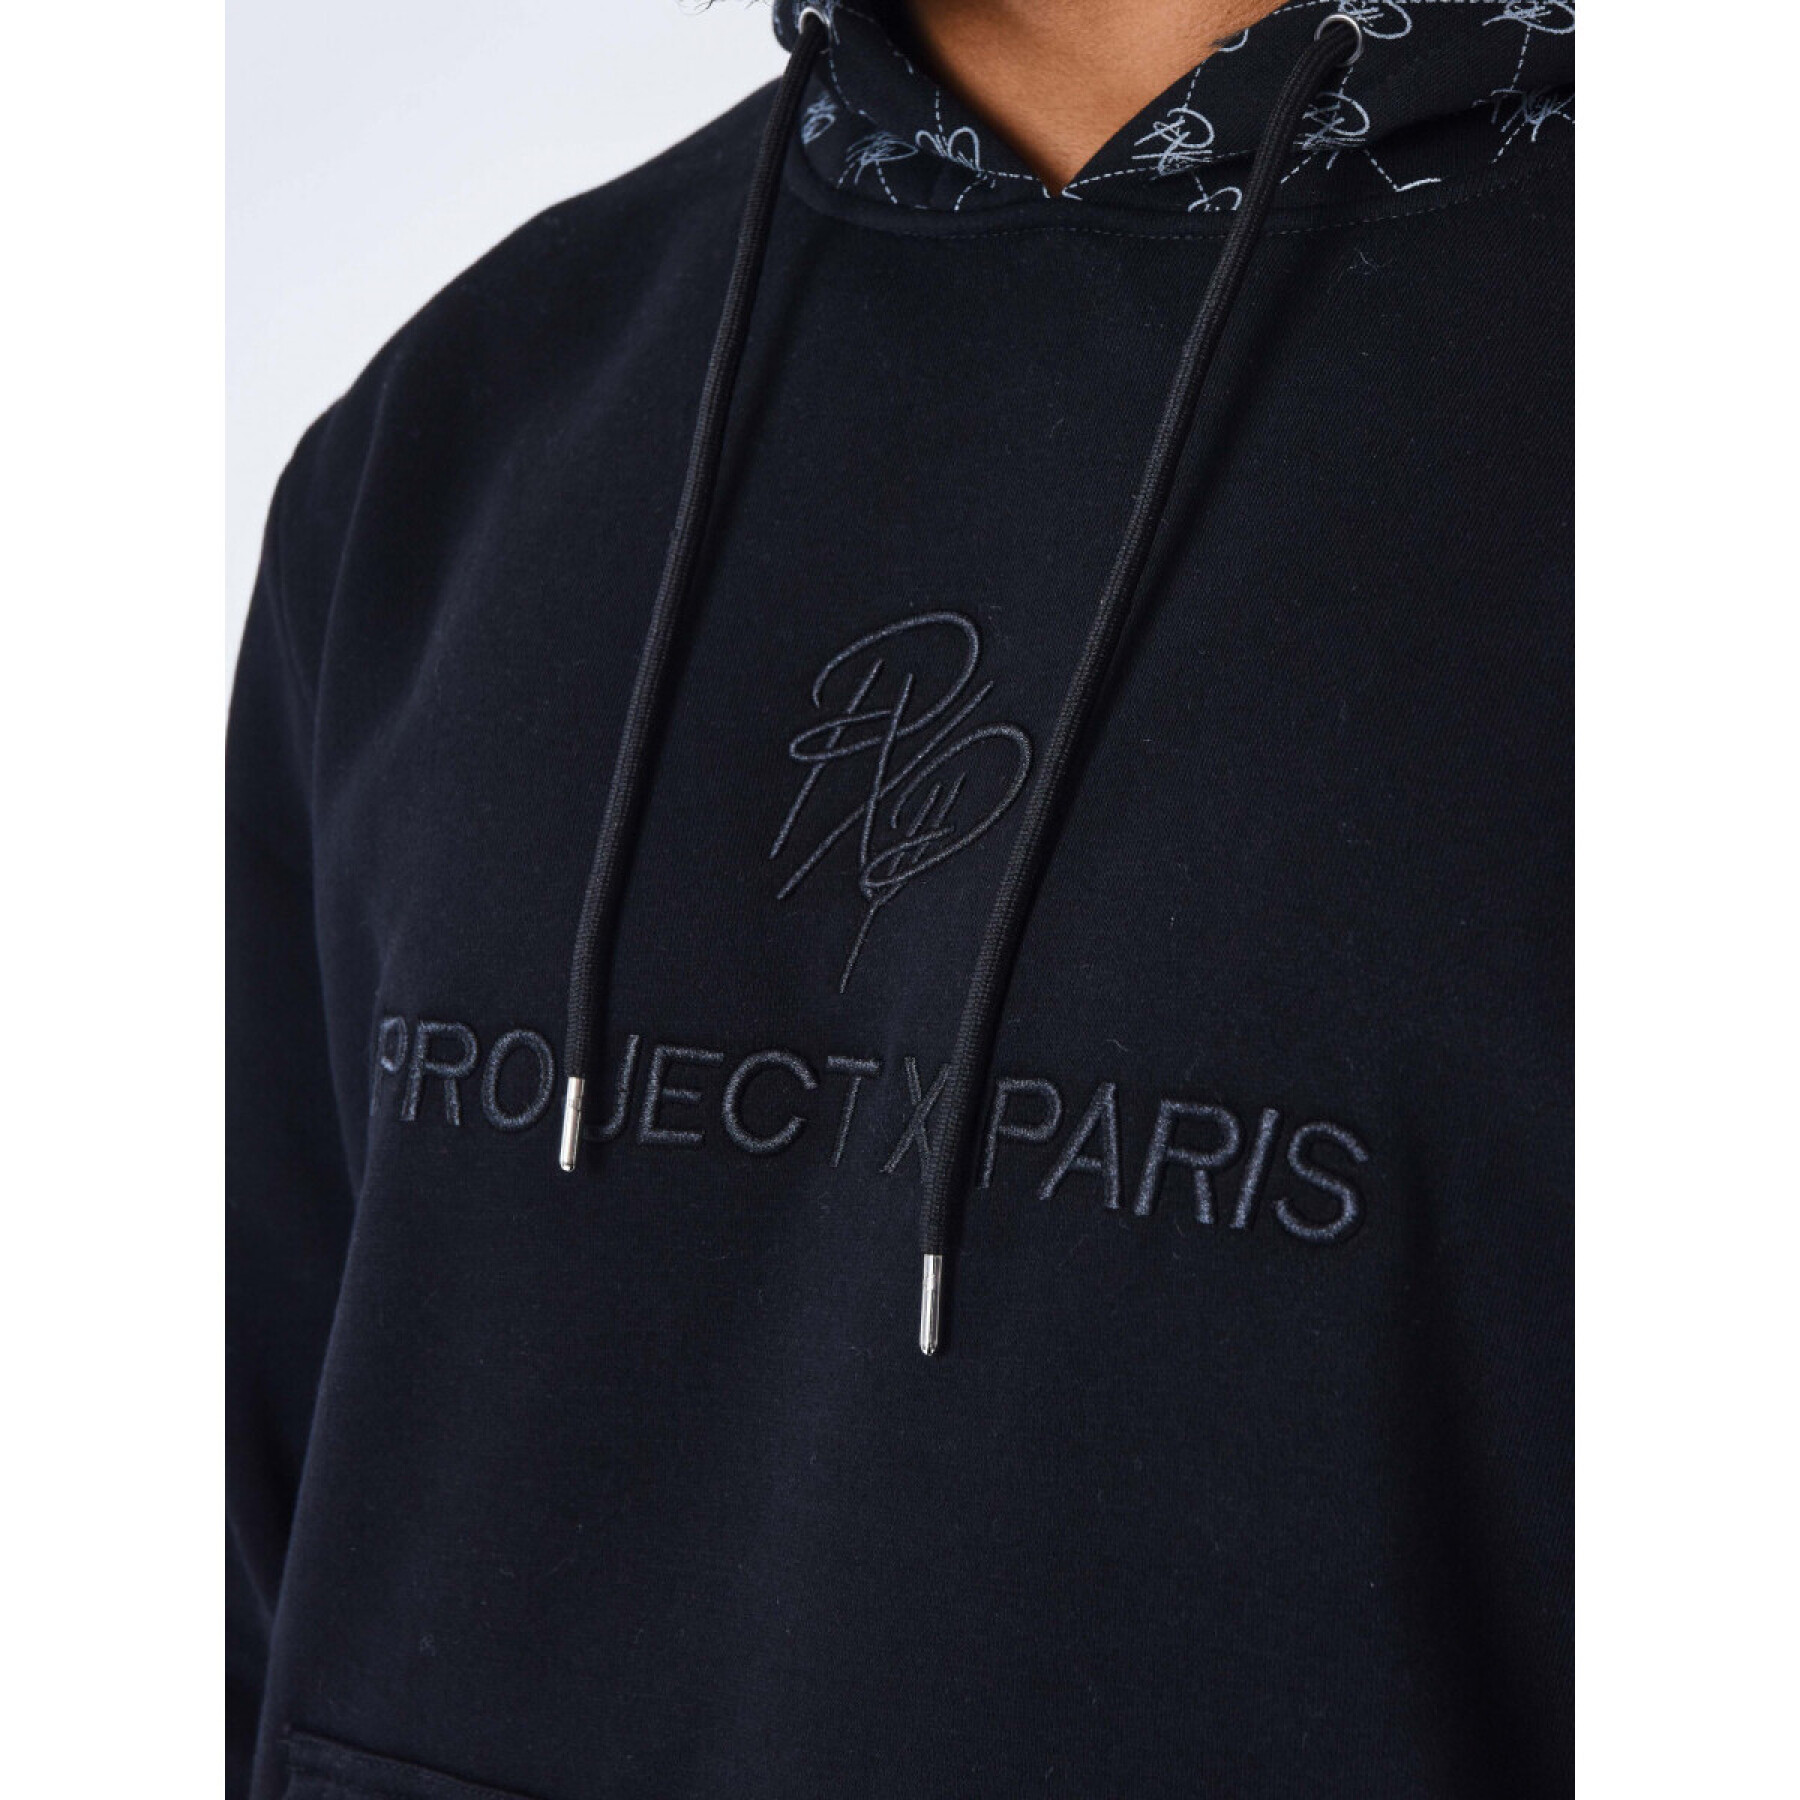 Hoodie Project X Paris All Over